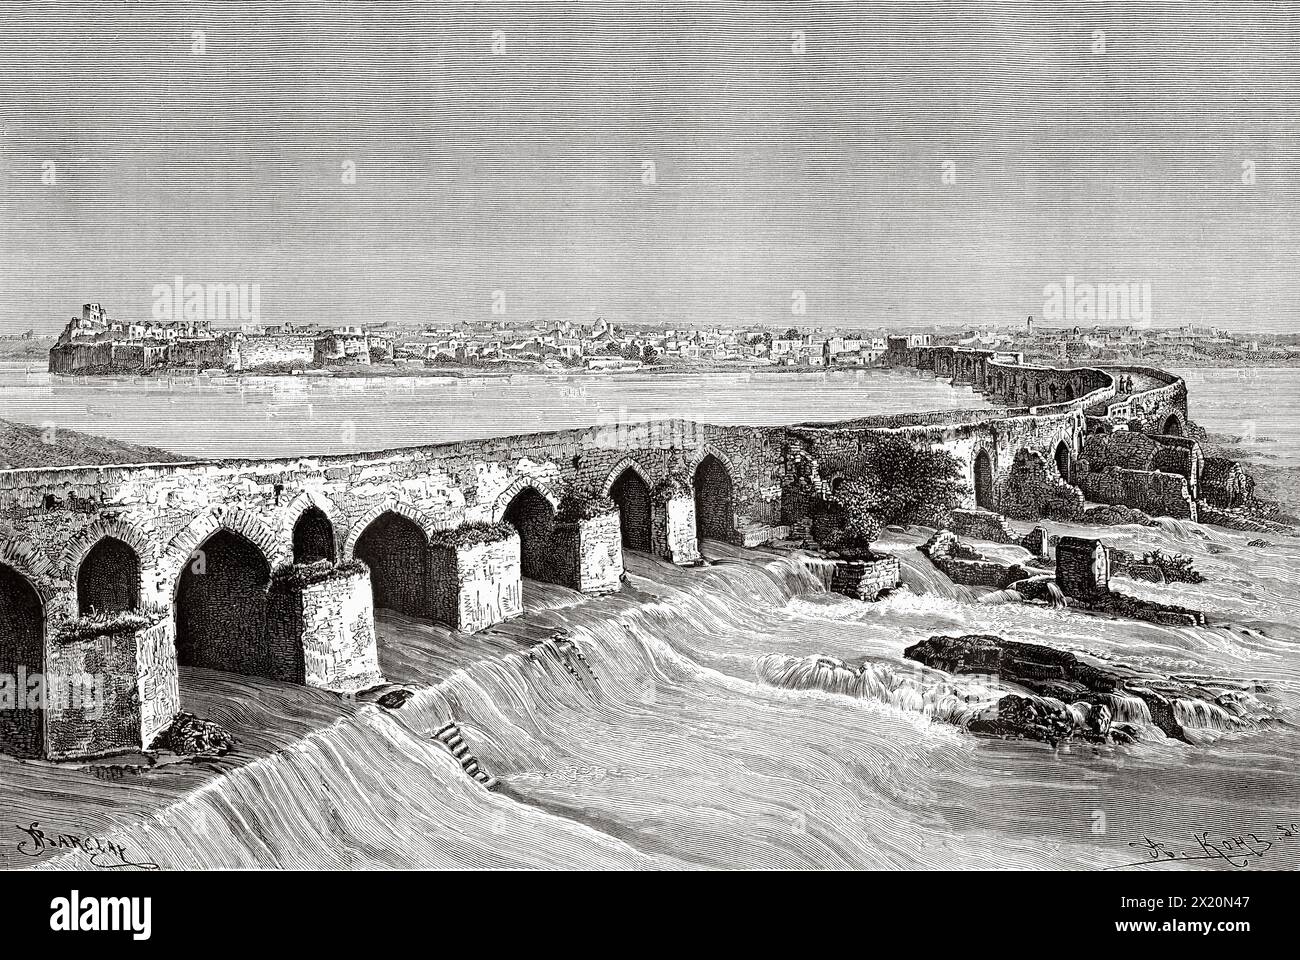 The Band-e Kaisar. Bridge of Valerian or Shadirwan was an ancient arch bridge in the city of Shushtar. Built by the Sassanids, using Roman prisoners of war as workforce, in the 3rd century AD on Sassanid order, Khuzestan province, Iran. Middle East. Drawing by Barclay. Persia, Chaldea and Susiana 1881-1882 by Jane Dieulafoy (1851 - 1916) Le Tour du Monde 1886 Stock Photo